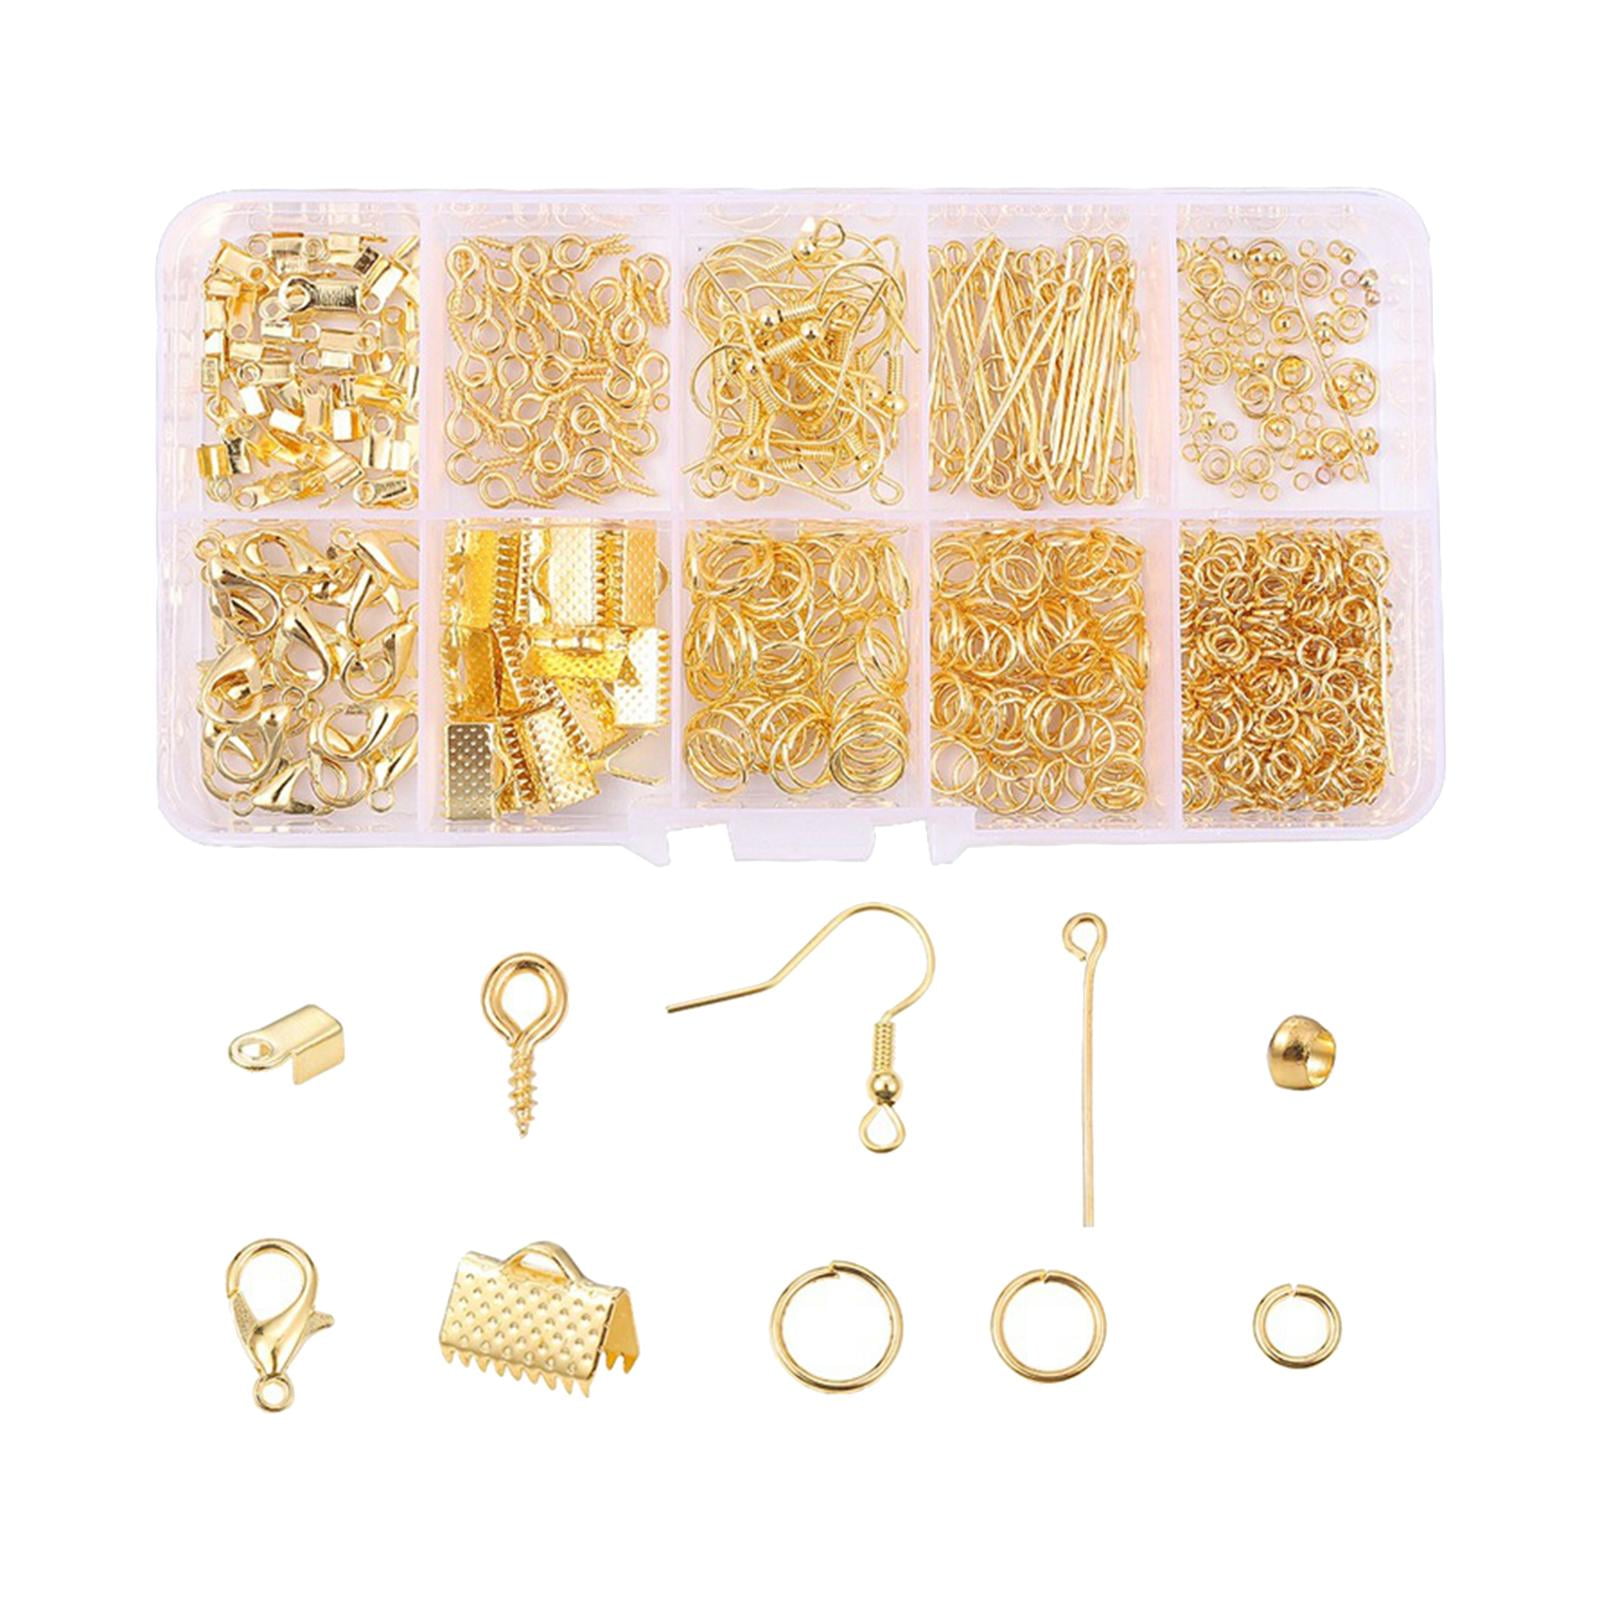  EXCEART 10pcs Nutcracker Accessories Jewelry Making